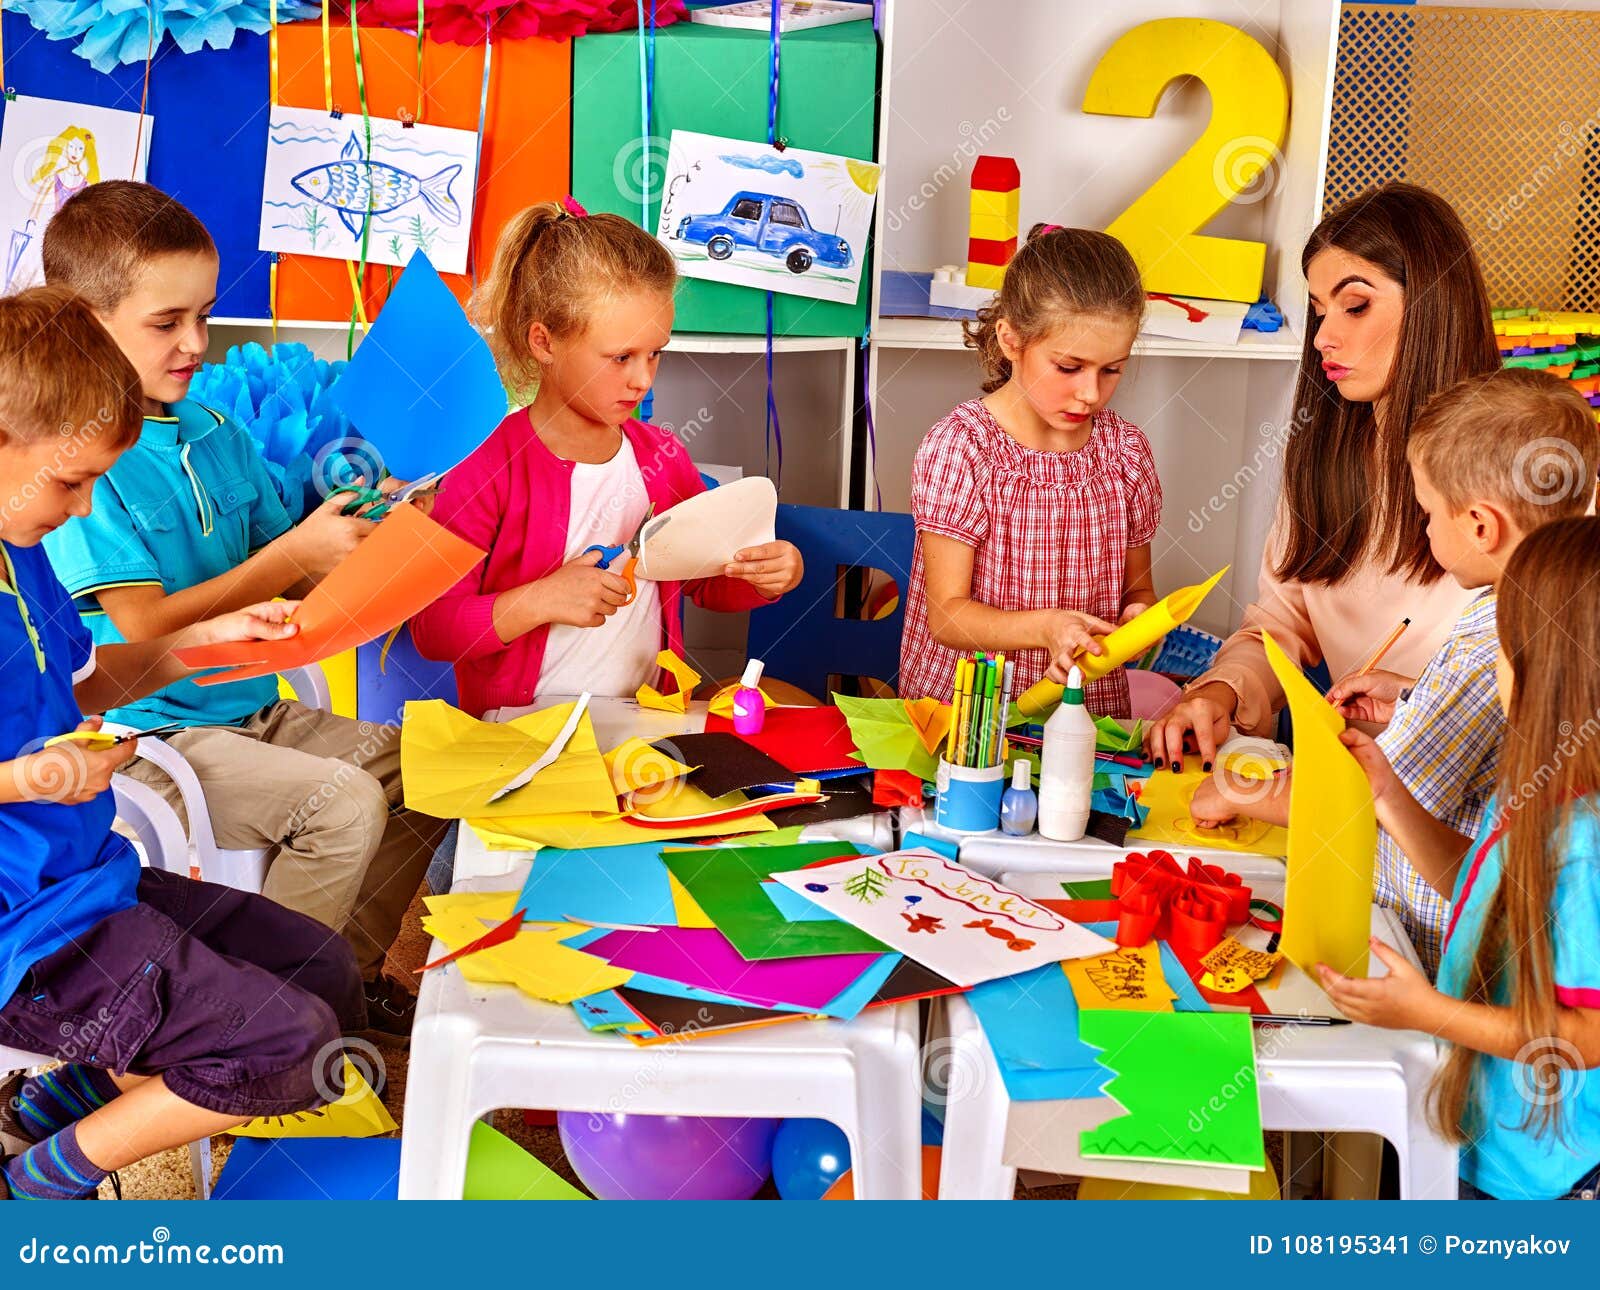 Children are Making Something Out of Colored Paper. Stock Image - Image ...